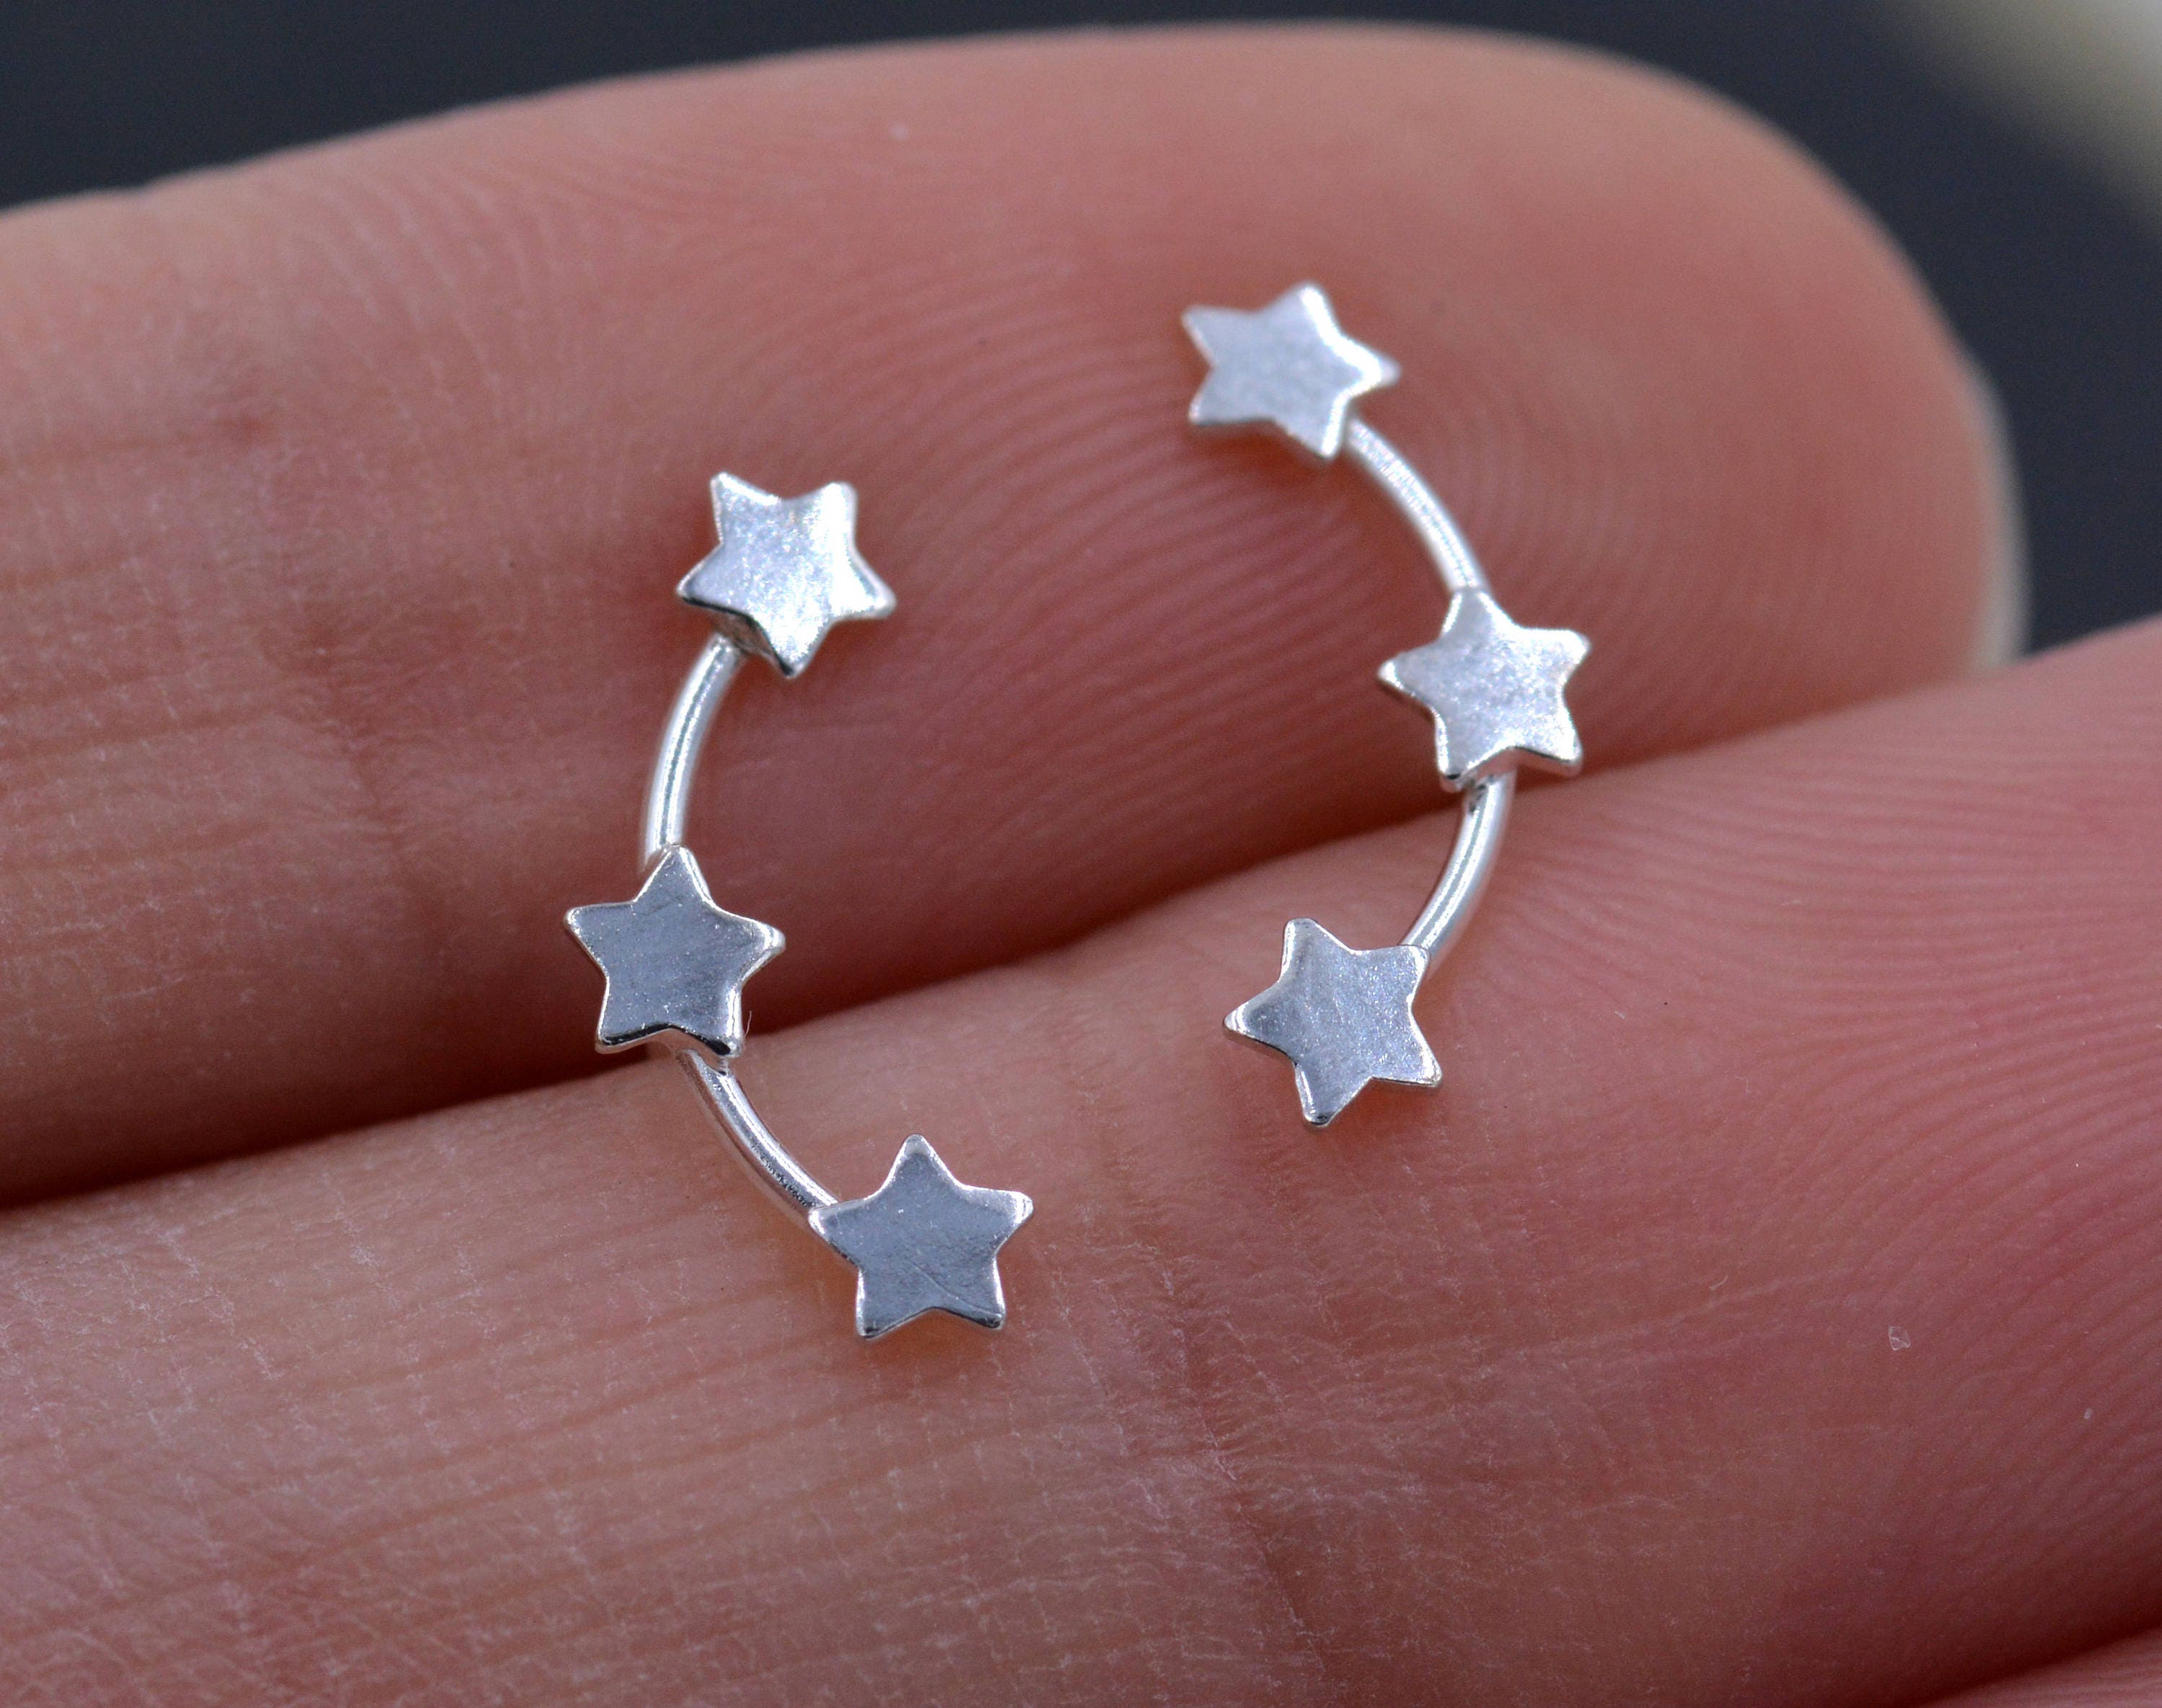 Brushed 925 Sterling Silver Plated Cute Small 3 Star Stud Earrings Pair Gift UK